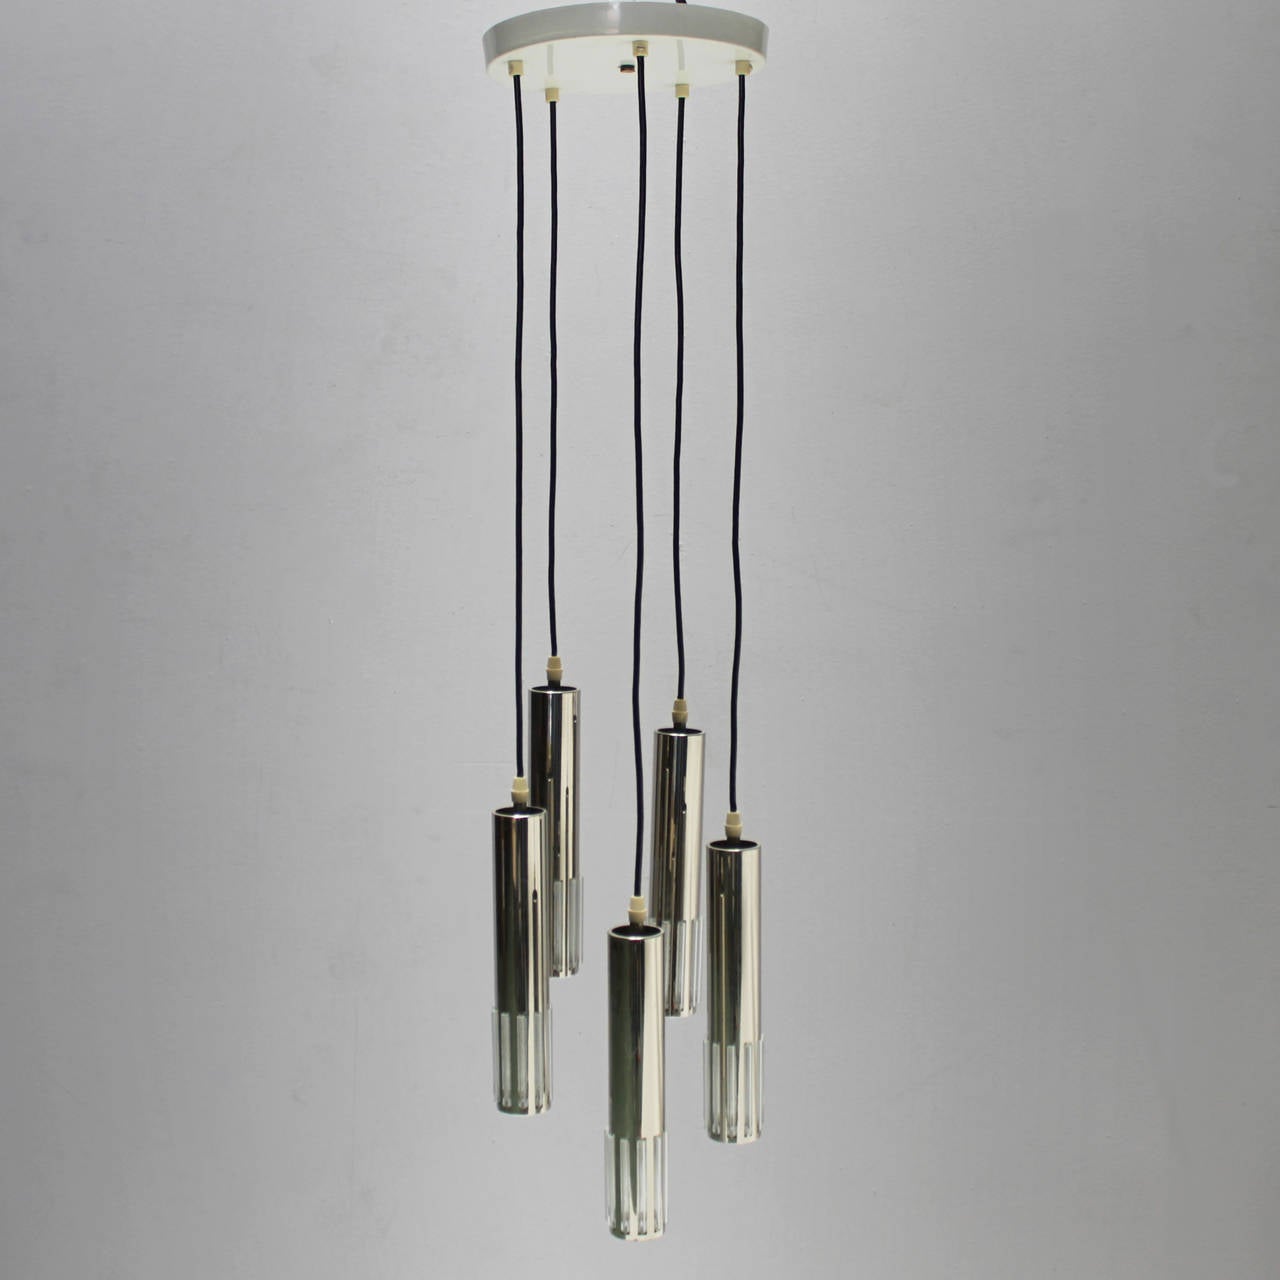 Chandelier by Schmahl & Schultz, (Wuppertal, Germany) with five pendants. Wire in good condition. Period circa 1970.
Materials and techniques: lacquered metal, glass and chrome.
Each light with one small Edison screw (SES), (E17 14-17 mm) max 60